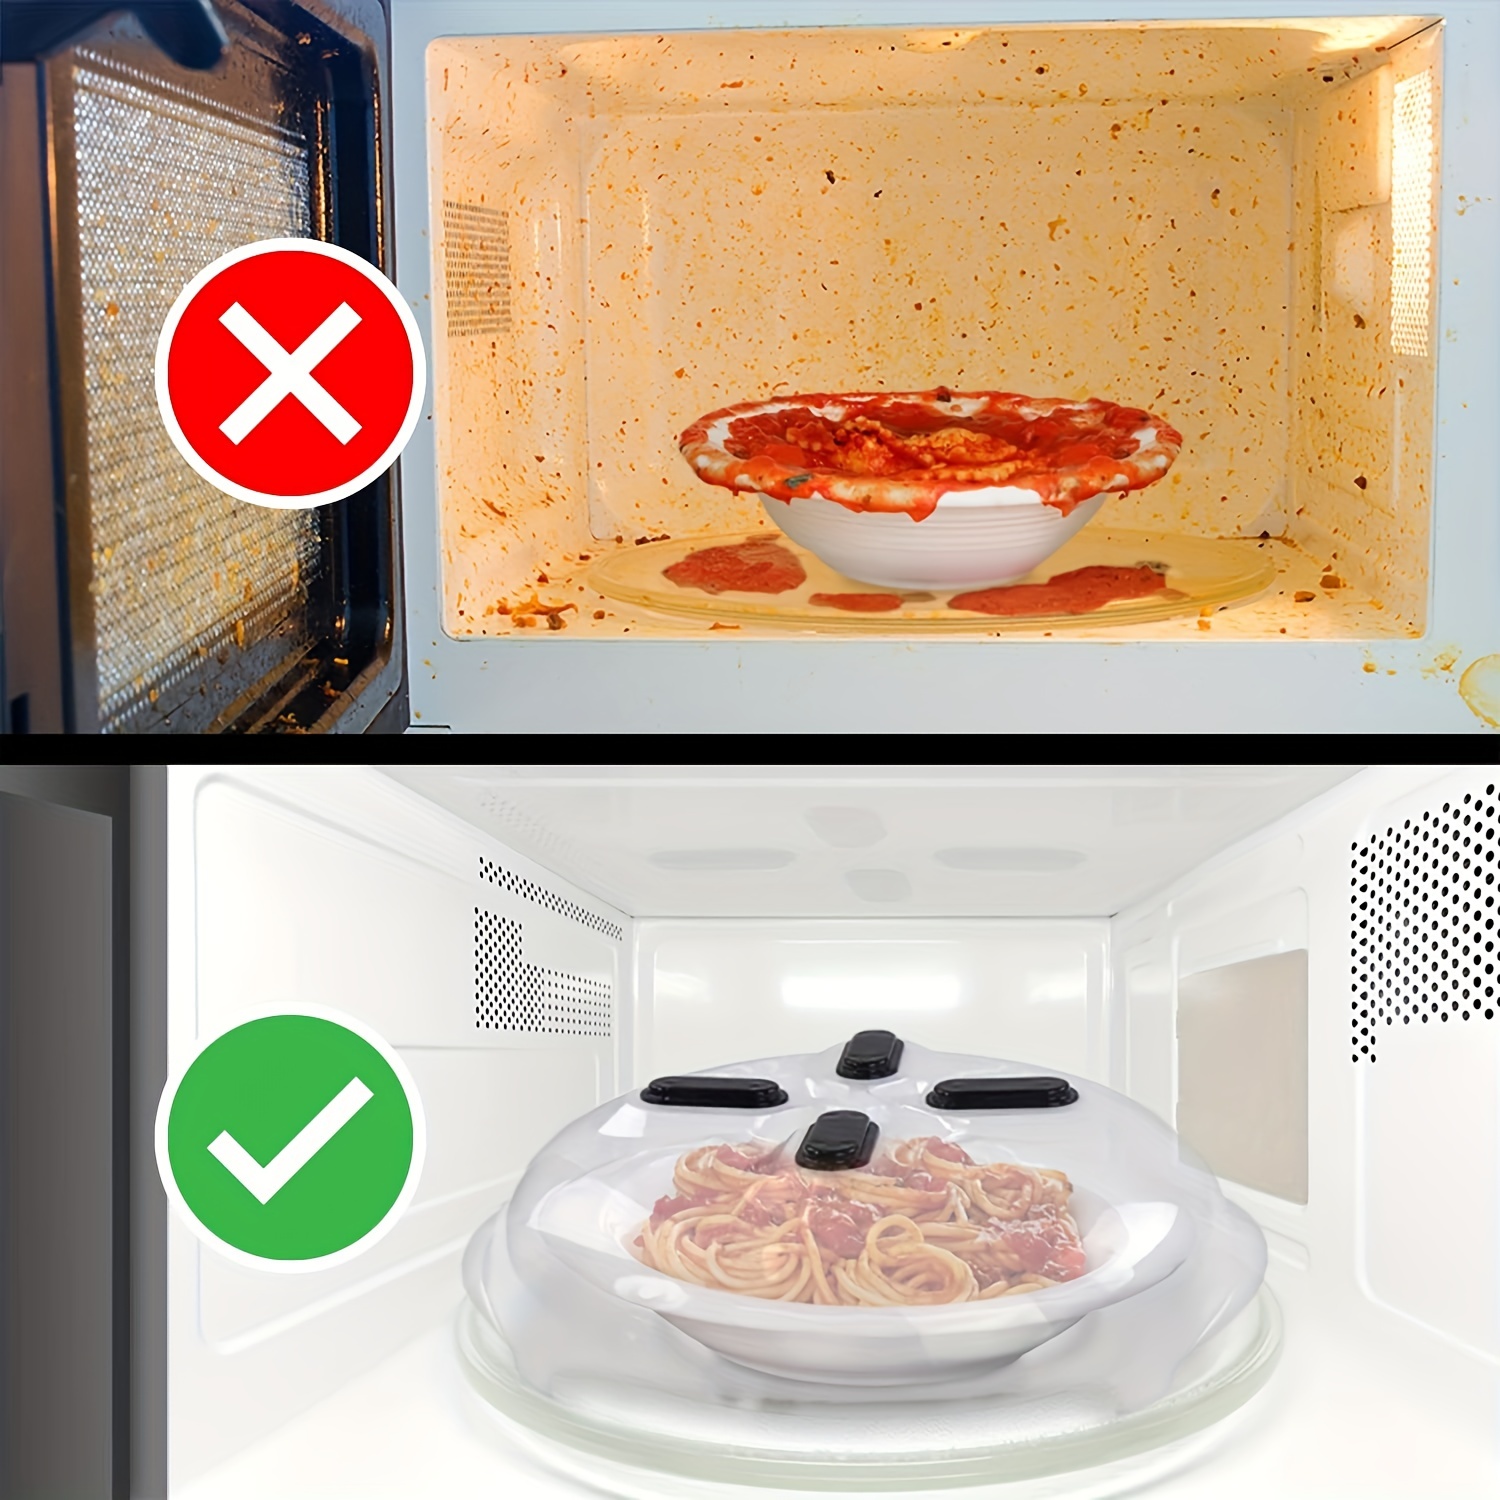 Microwave Cover for Food Clear Microwave Splatter Cover with